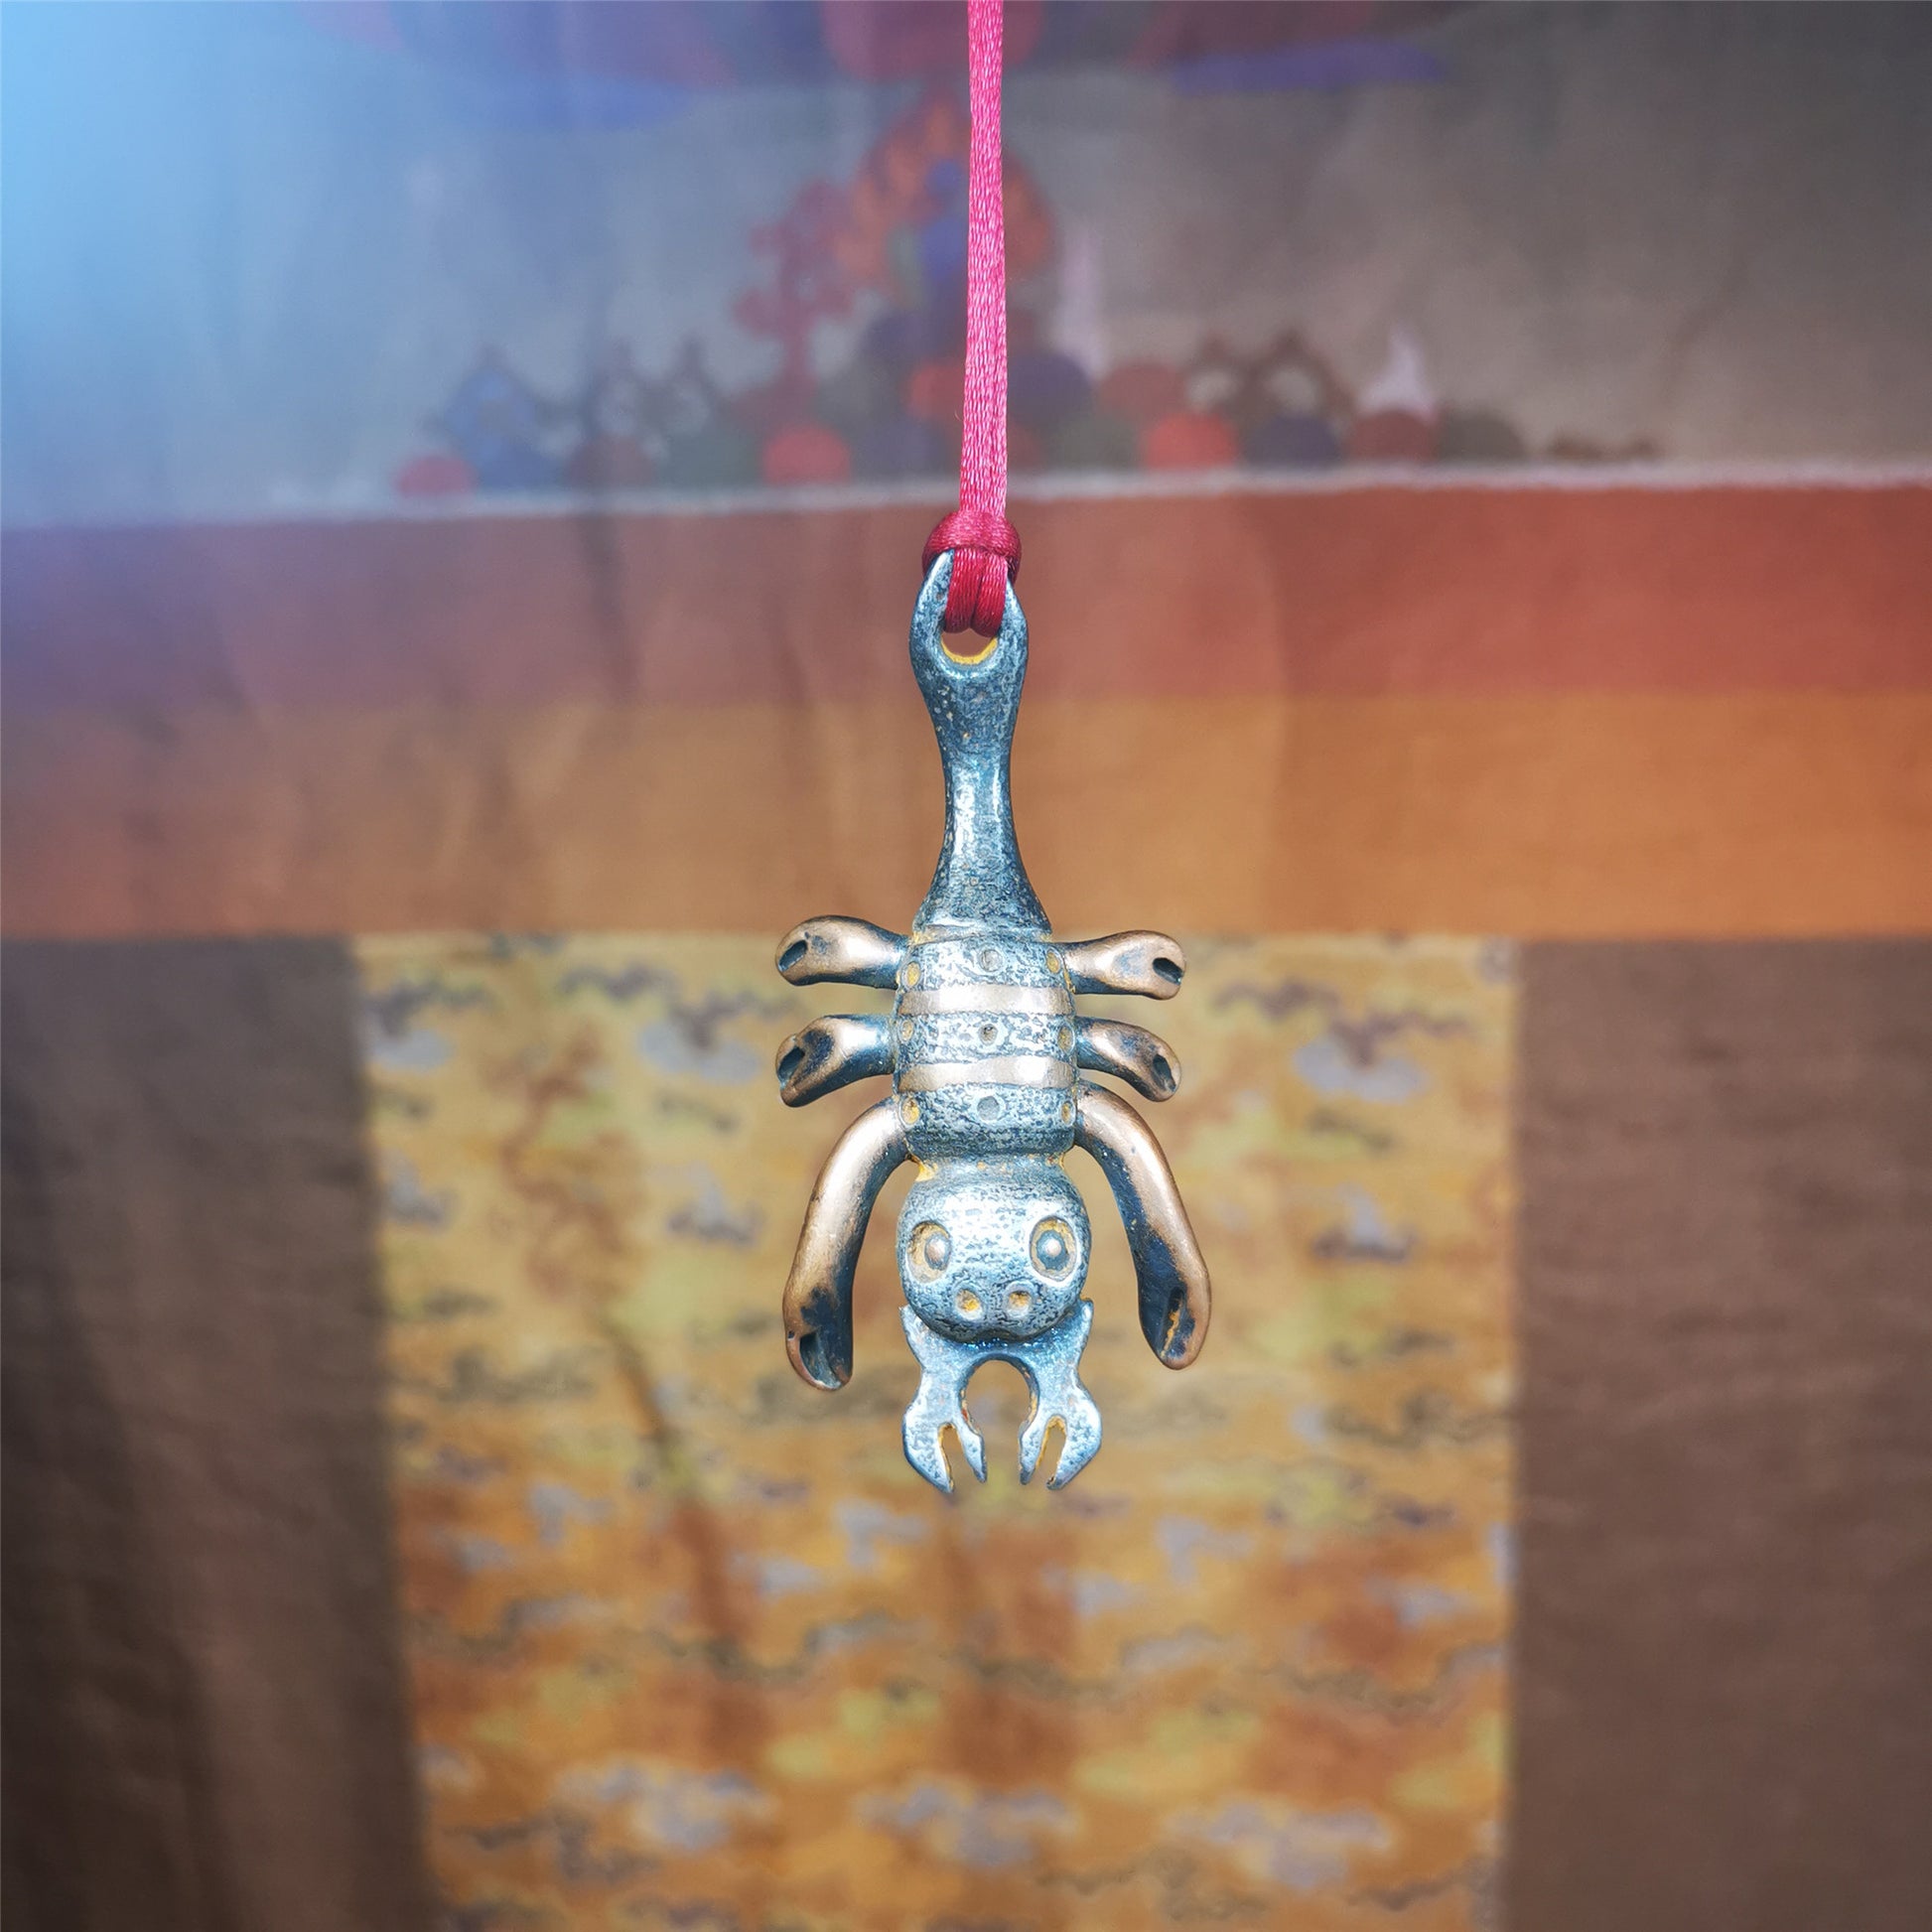 This scorpion is handmade by Tibetan craftsmen in Hepo Township, Baiyu County, the birthplace of the famous Tibetan handicrafts. It is made of cold iron,black color, the shape is scorpion guru (from Guru Rinpoche), use the copper inlaid and carved craftsmanship. The eight legs of this scorpion are carved from copper and are inlaid in a body made of thunder iron,a beautiful pattern on the abdomen of the scorpion, exquisite and beautiful craftsmanship.